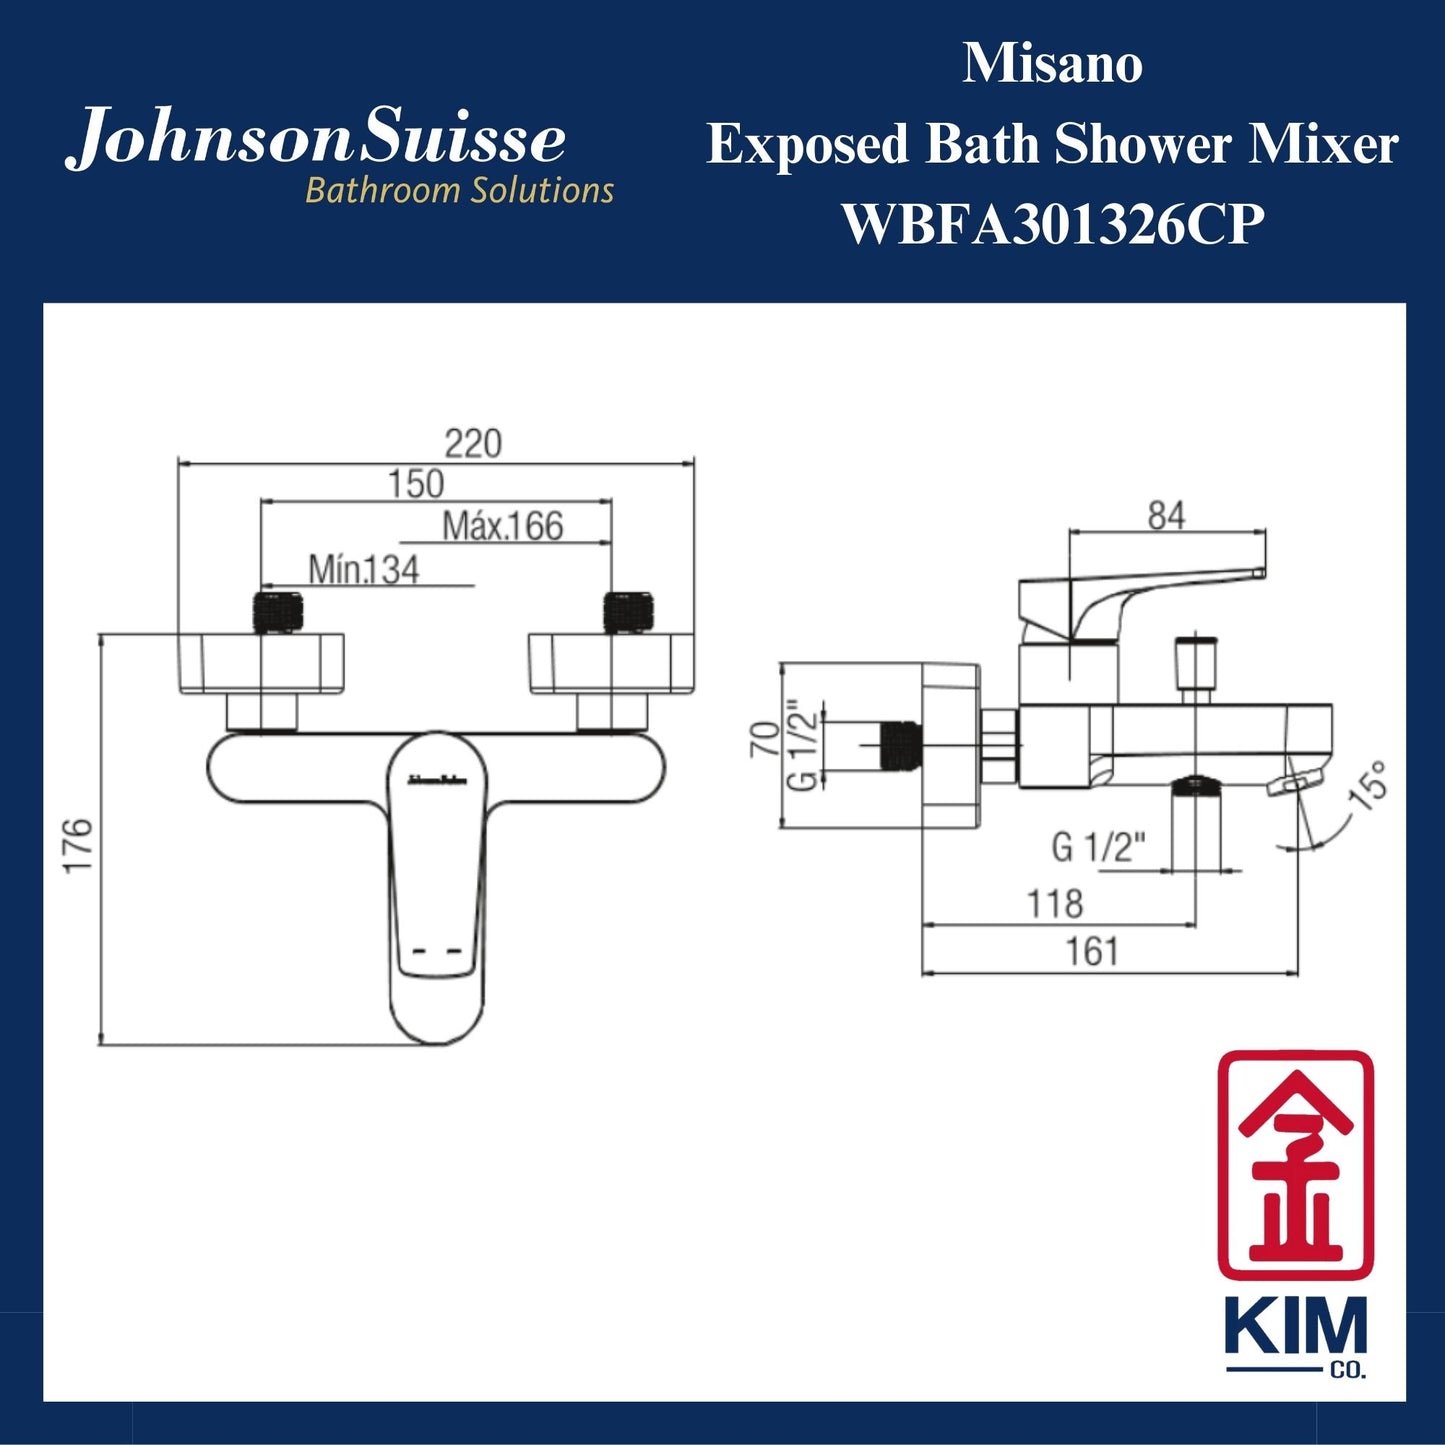 Johnson Suisse Misano Exposed Bath Shower Mixer Without Shower Kit (WBFA301326CP)